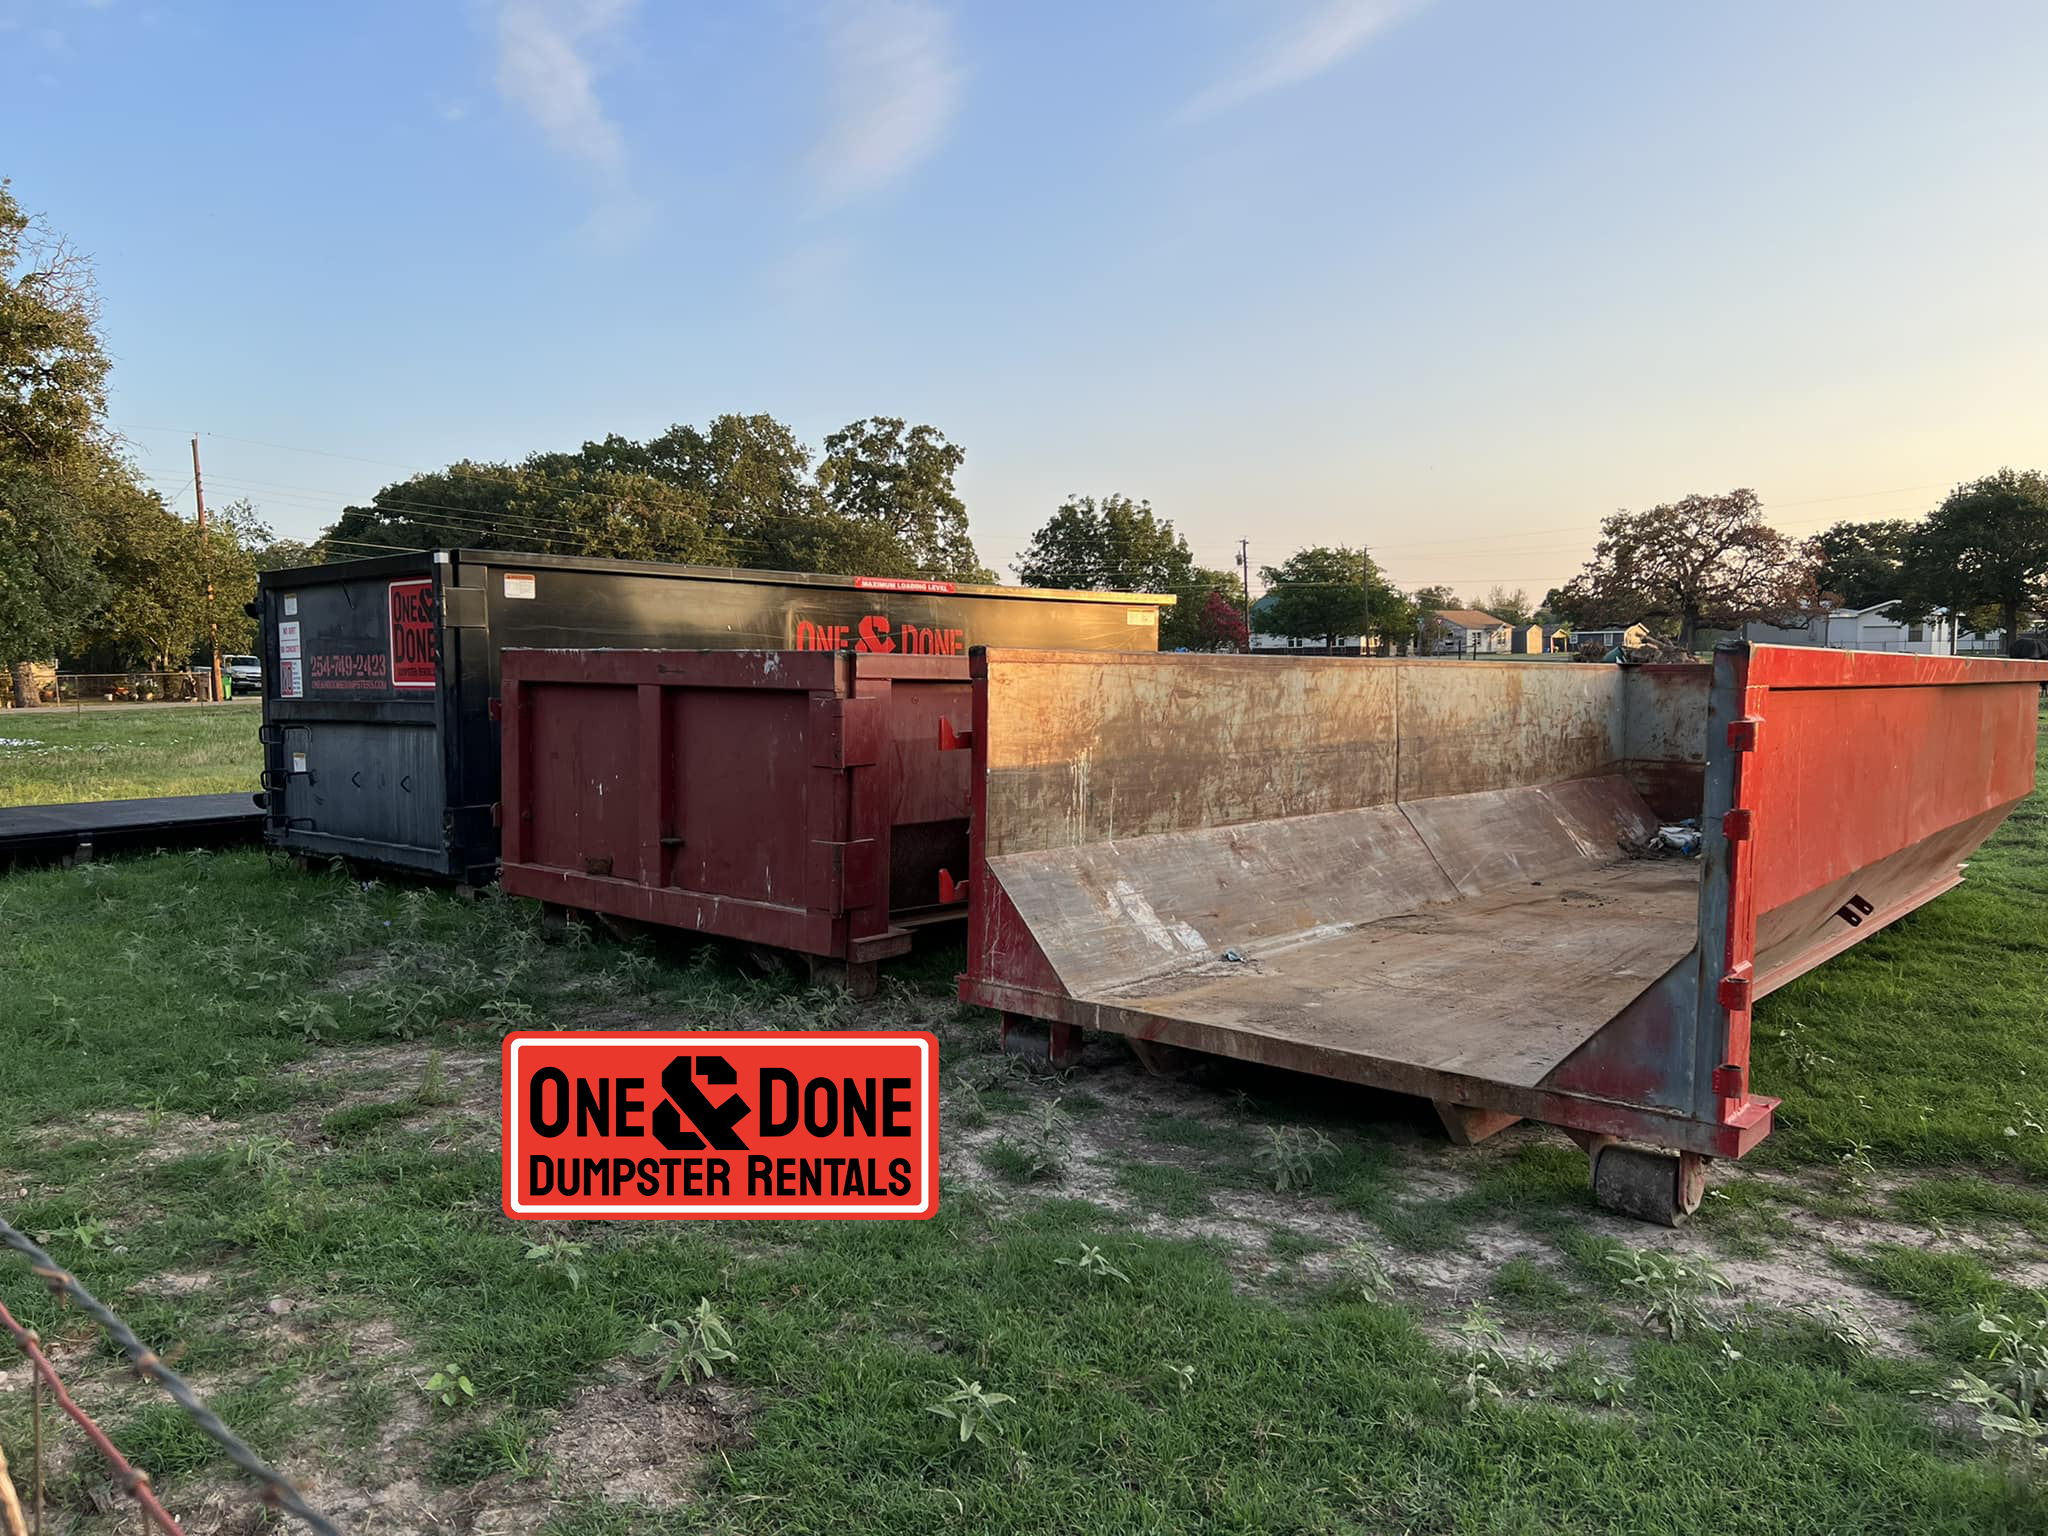 Small Dumpster Rental One and Done Dumpster Rentals Mexia TX Homeowners Use for Yard Waste